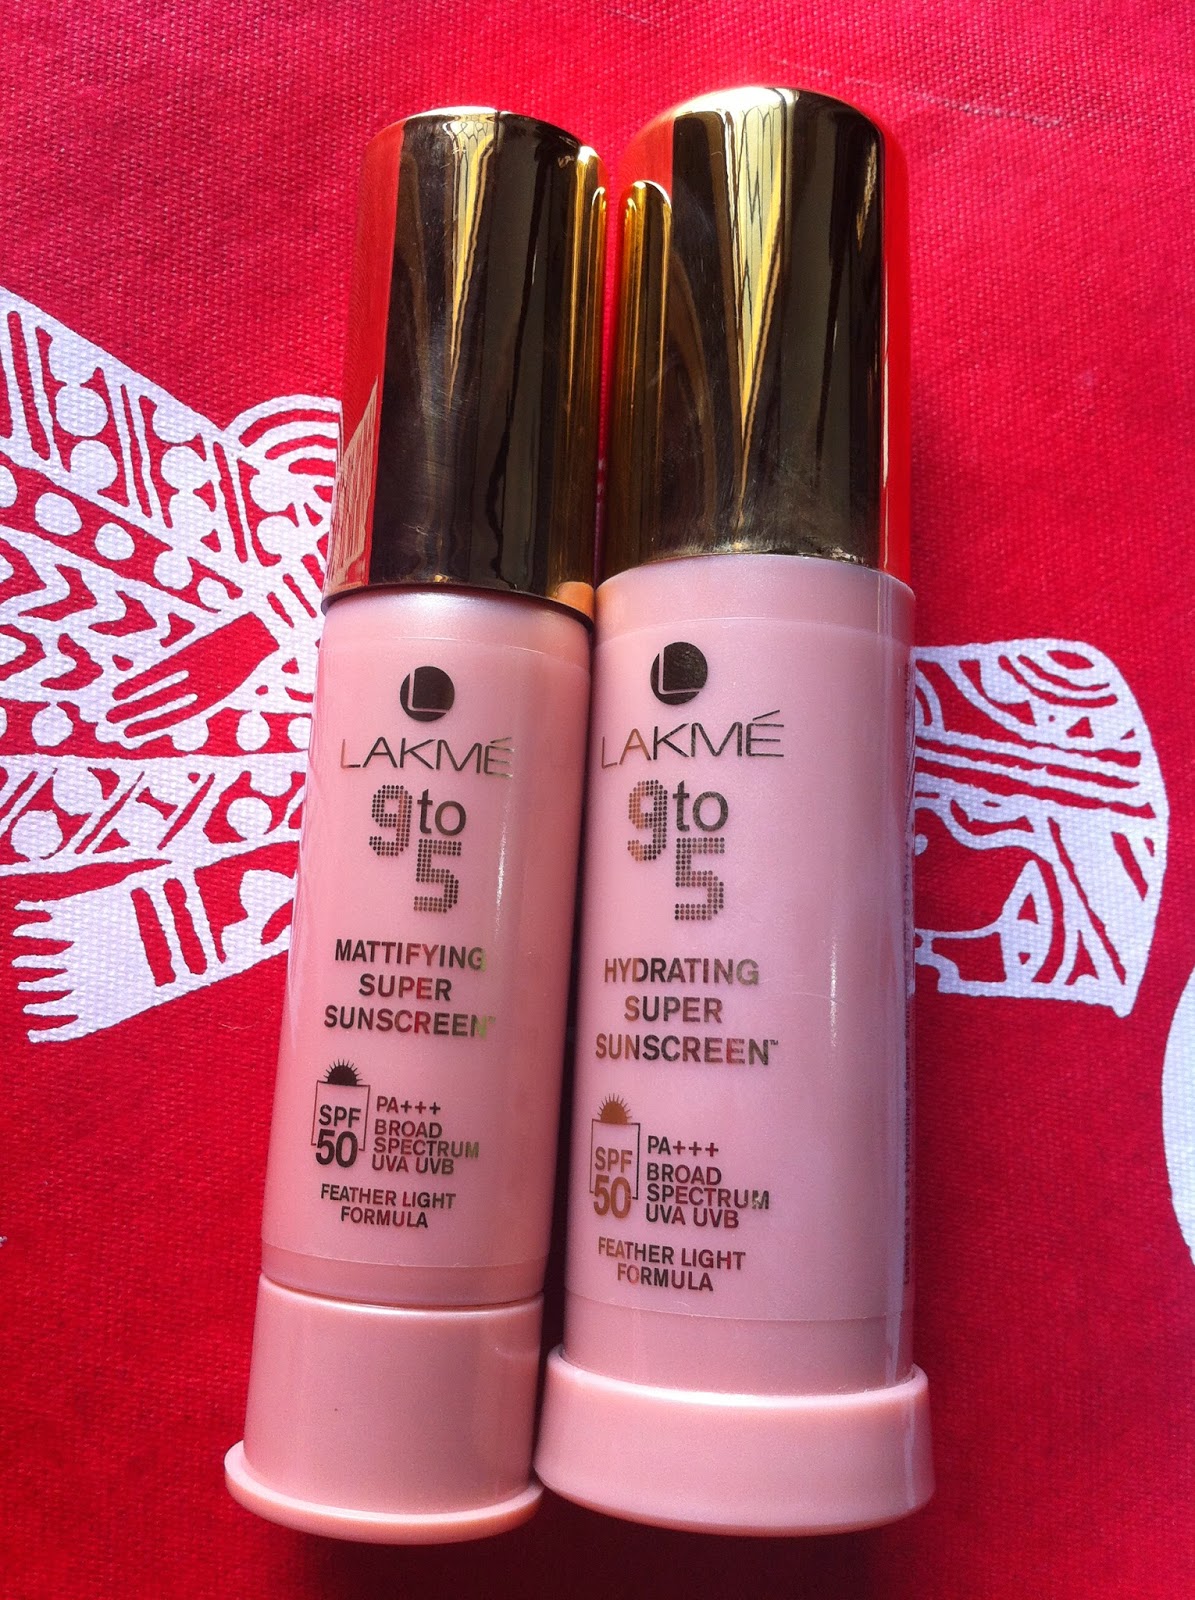 Lakme 9 to 5 Mattifying and Hydrating Super Suncreens - Review - Pout ...